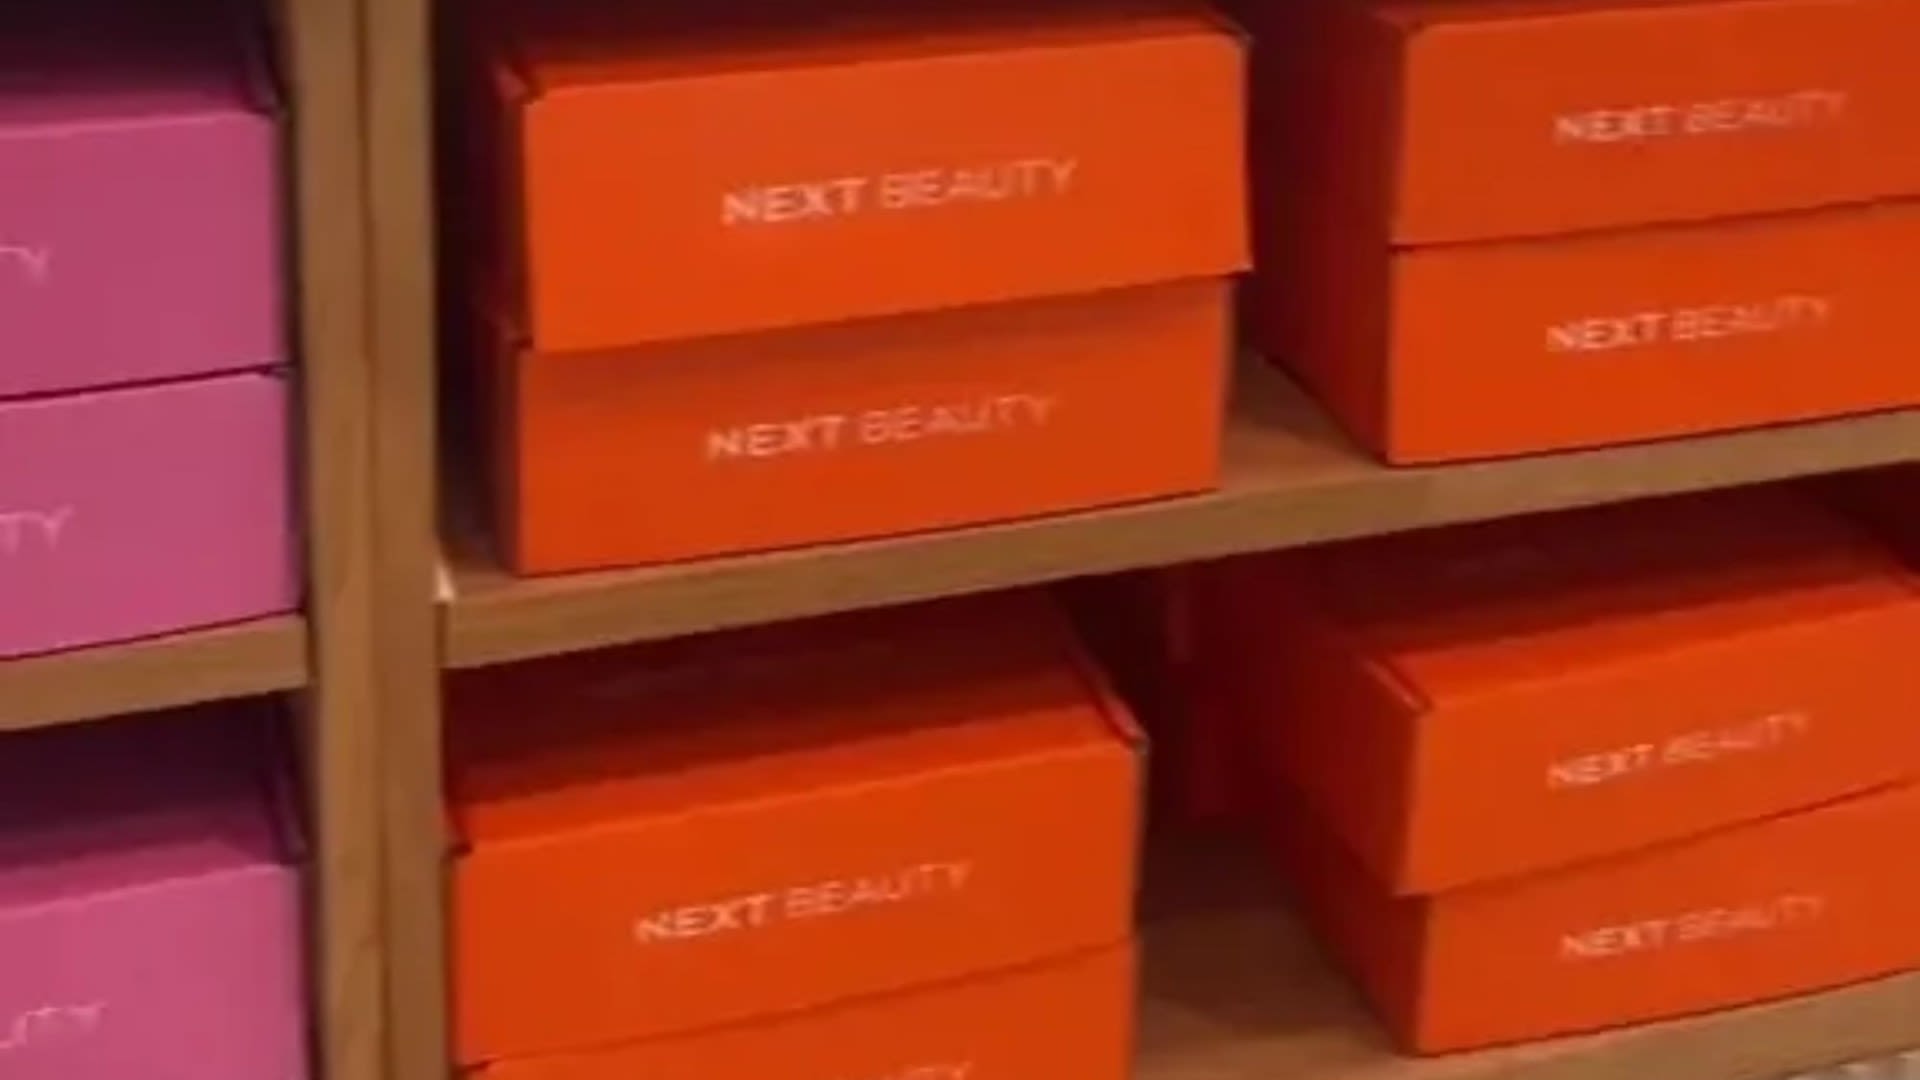 Beauty fans race to Next to fill up bargain beauty boxes for just £15